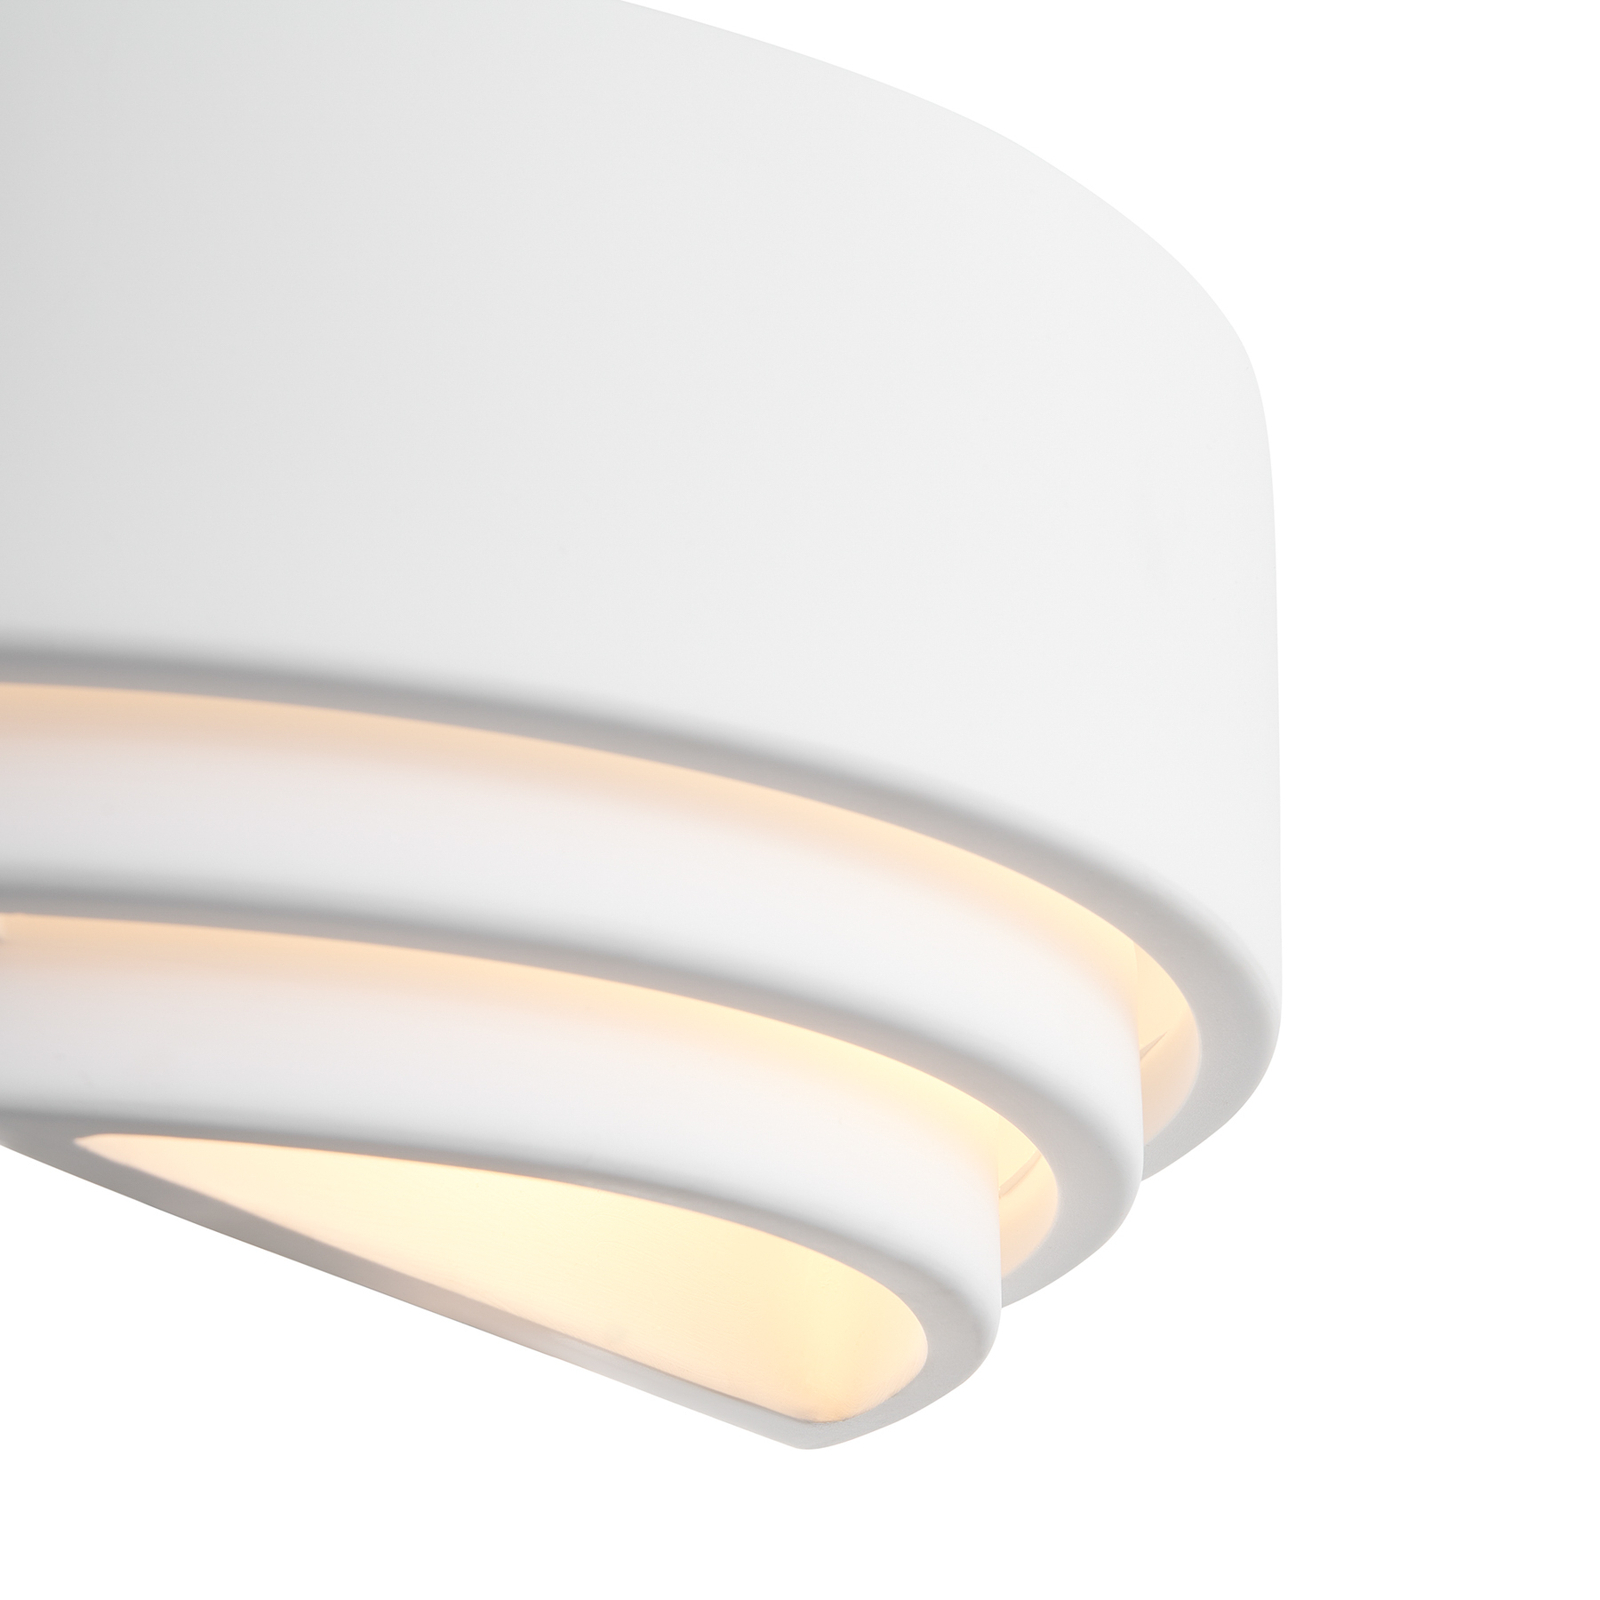 Lancio Oblong wall light made of plaster, with plug, white